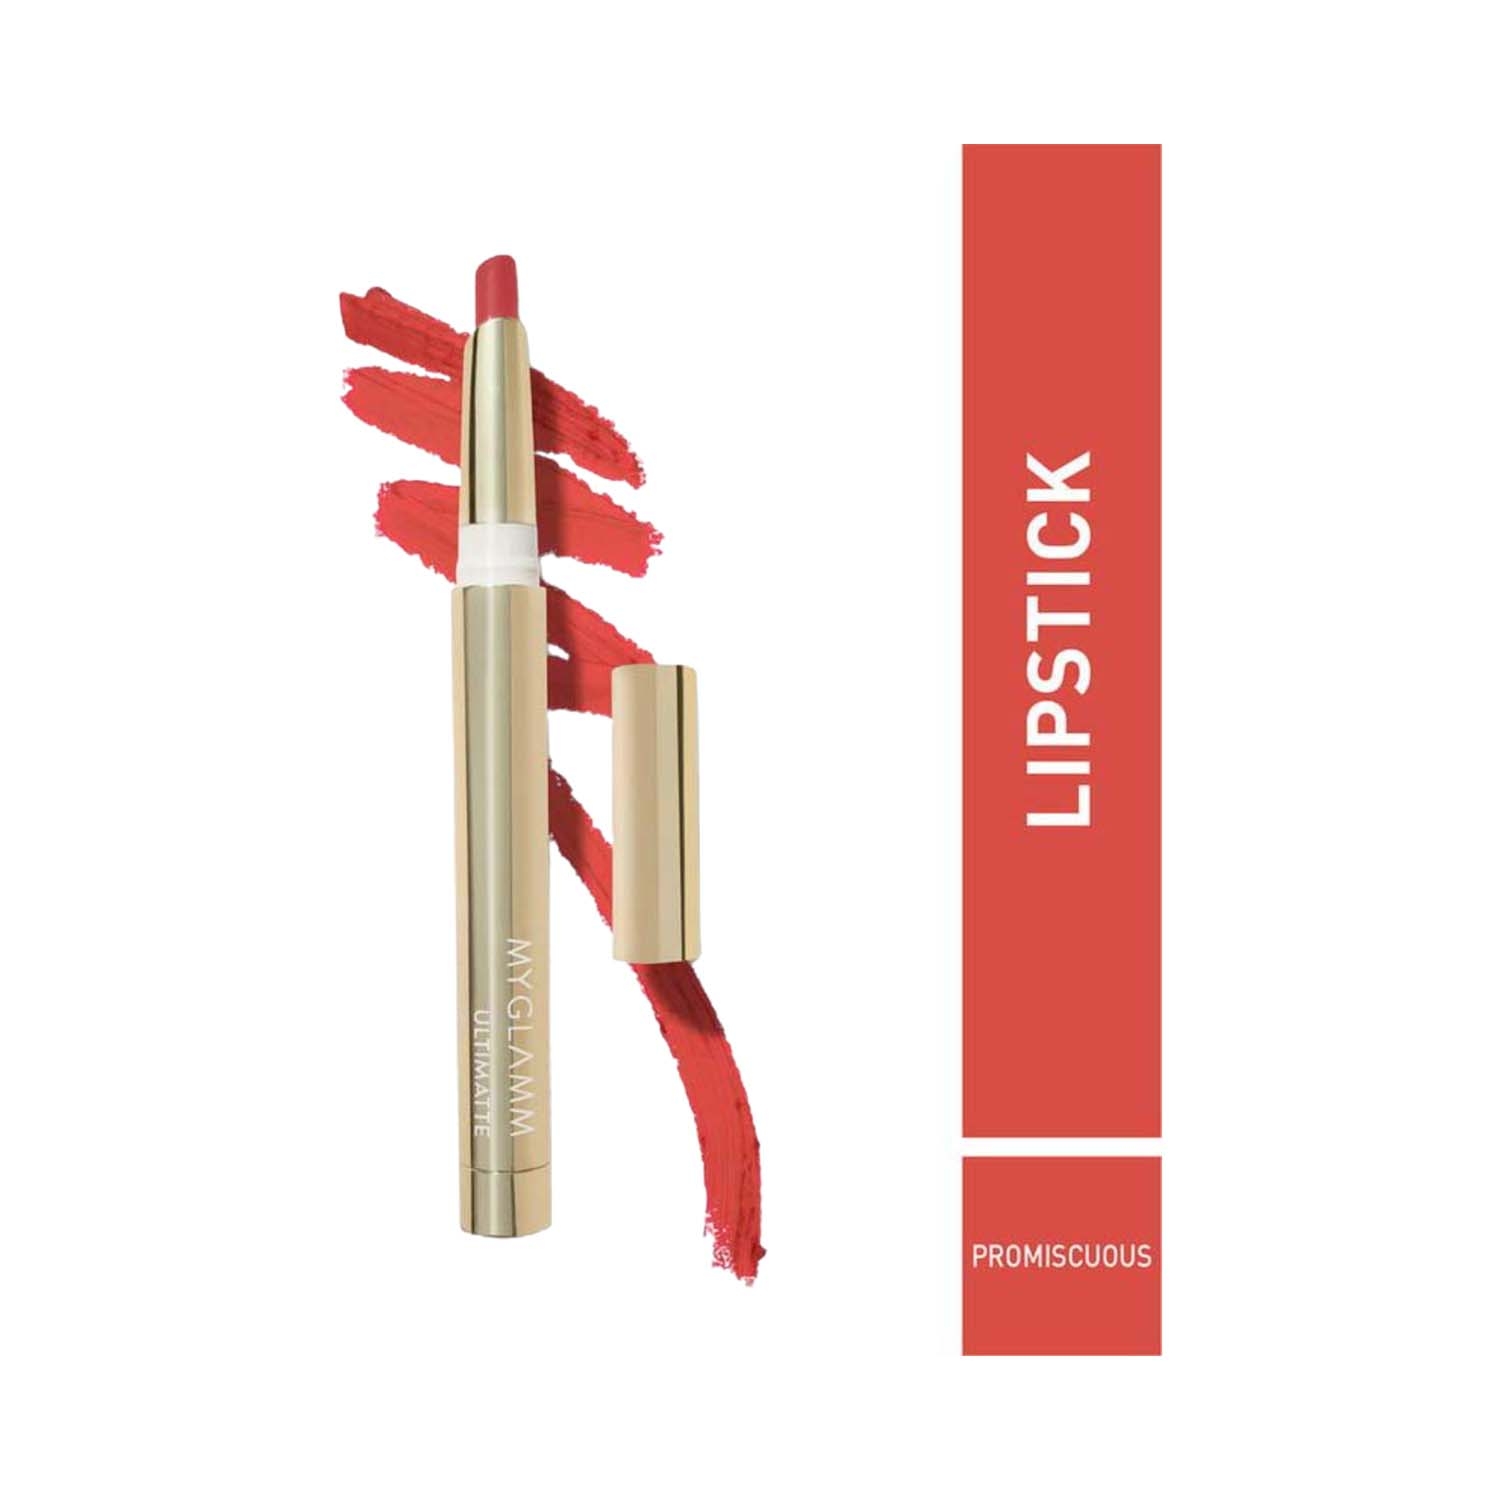 MyGlamm | Myglamm Ultimatte Long Stay Matte Lipstick - Promiscuous (1.3g)